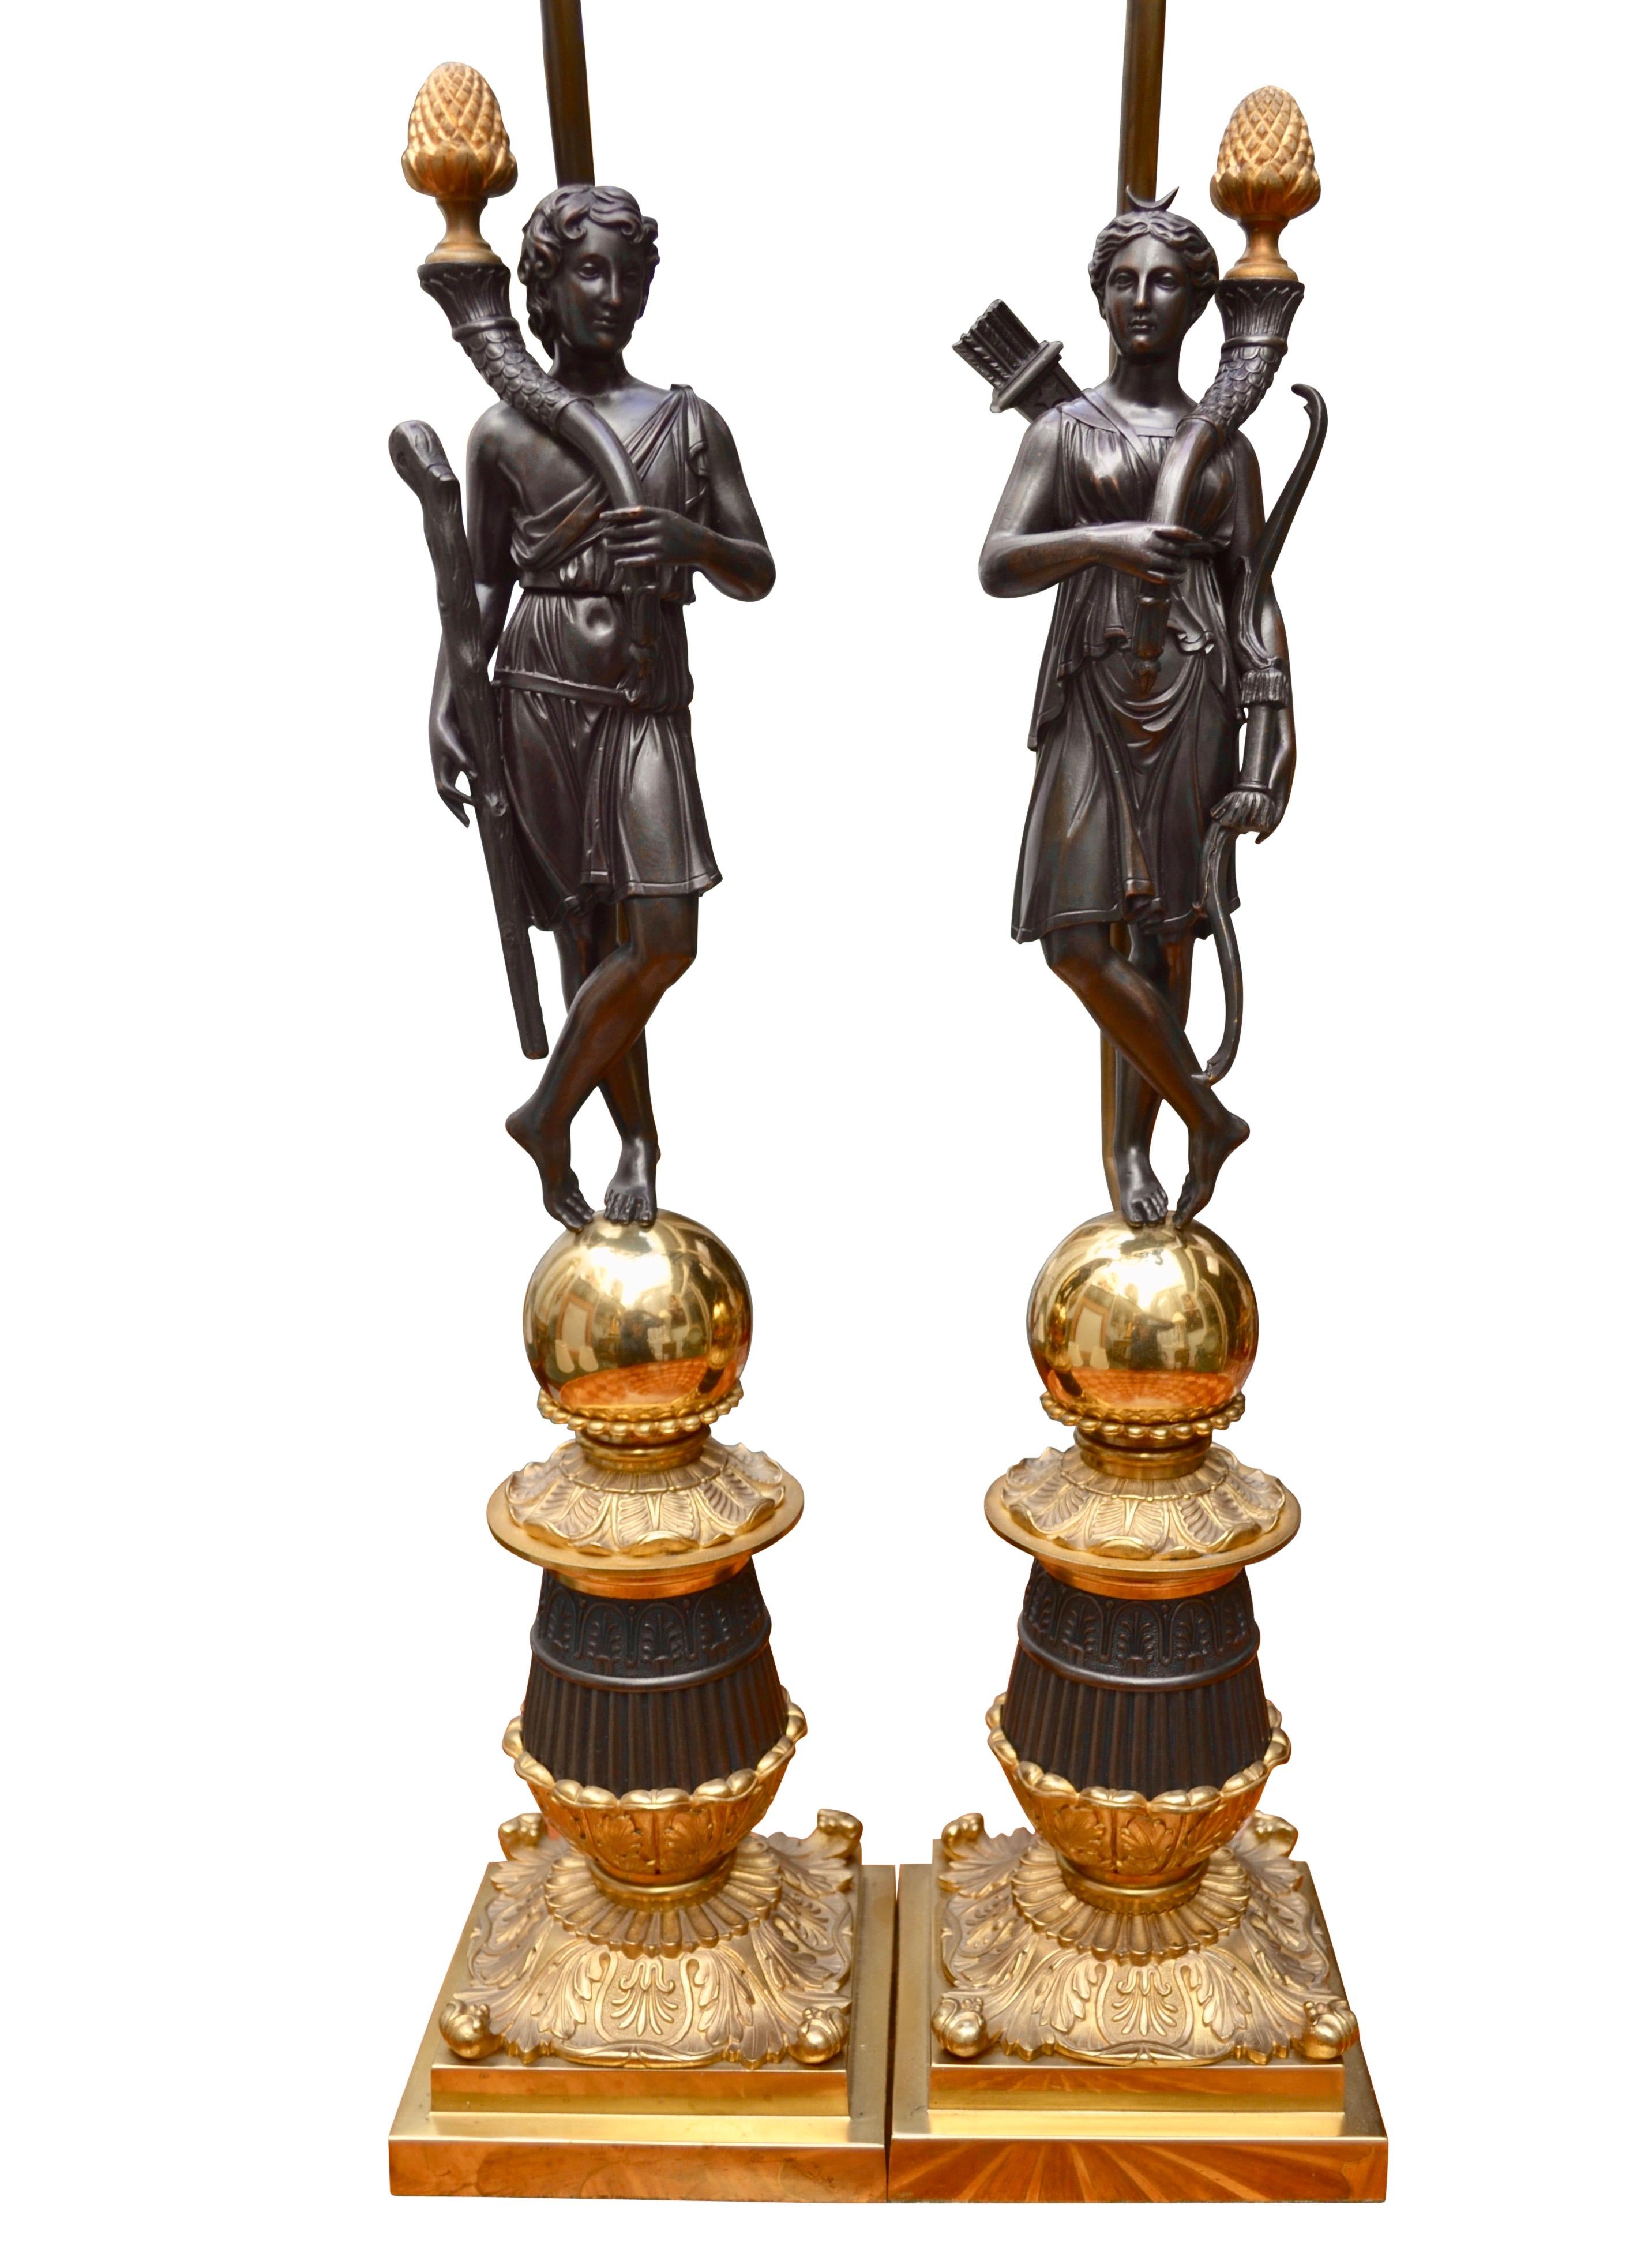 Pair of French 19 Century Neoclassical Figurative Bronze Lamps In Good Condition For Sale In Vancouver, British Columbia